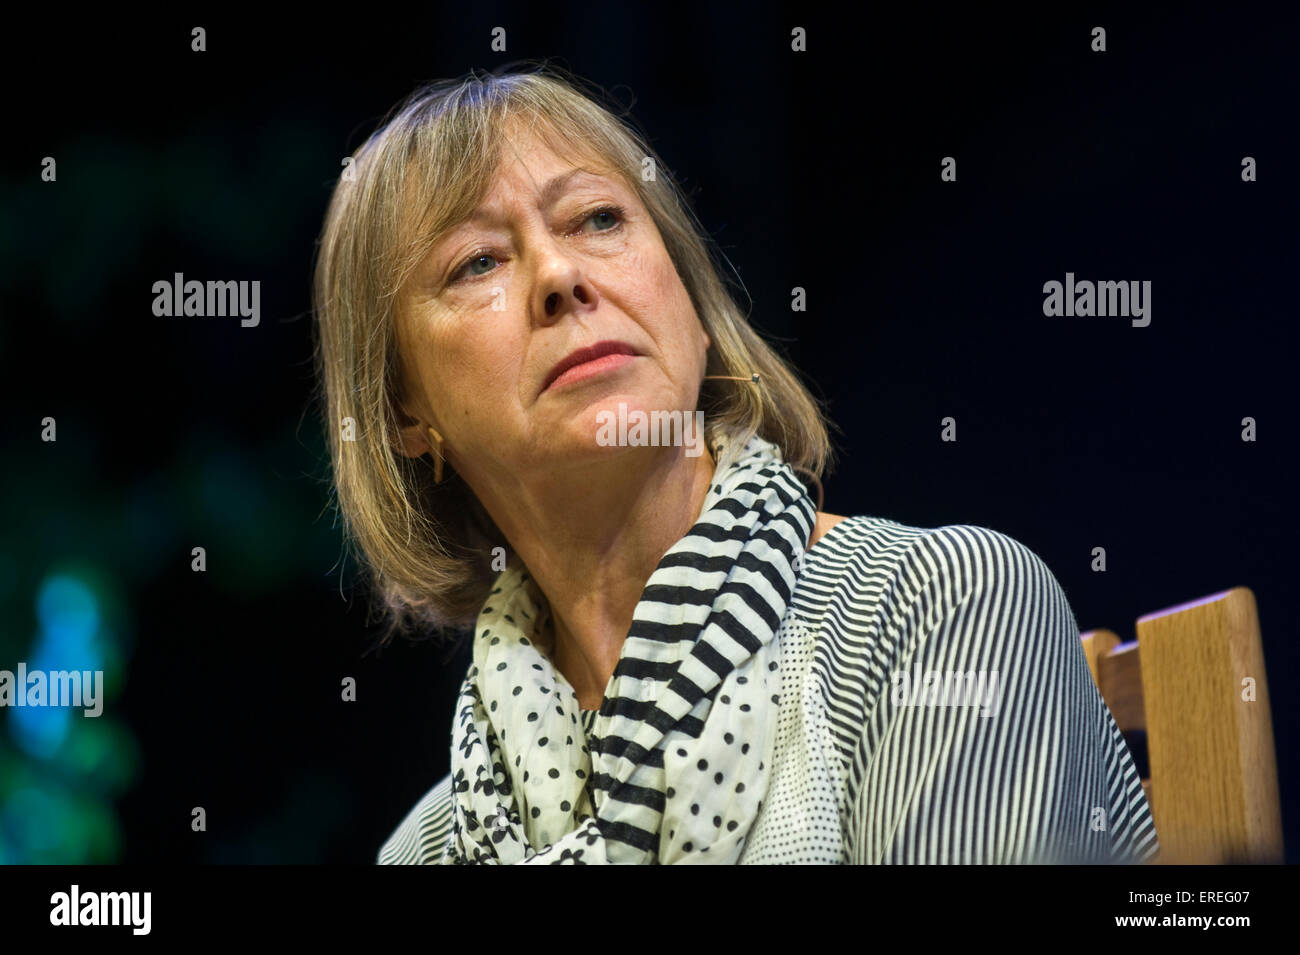 Jenny Agutter actress 'Call The Midwife' discussion on stage at Hay Festival 2015 Stock Photo